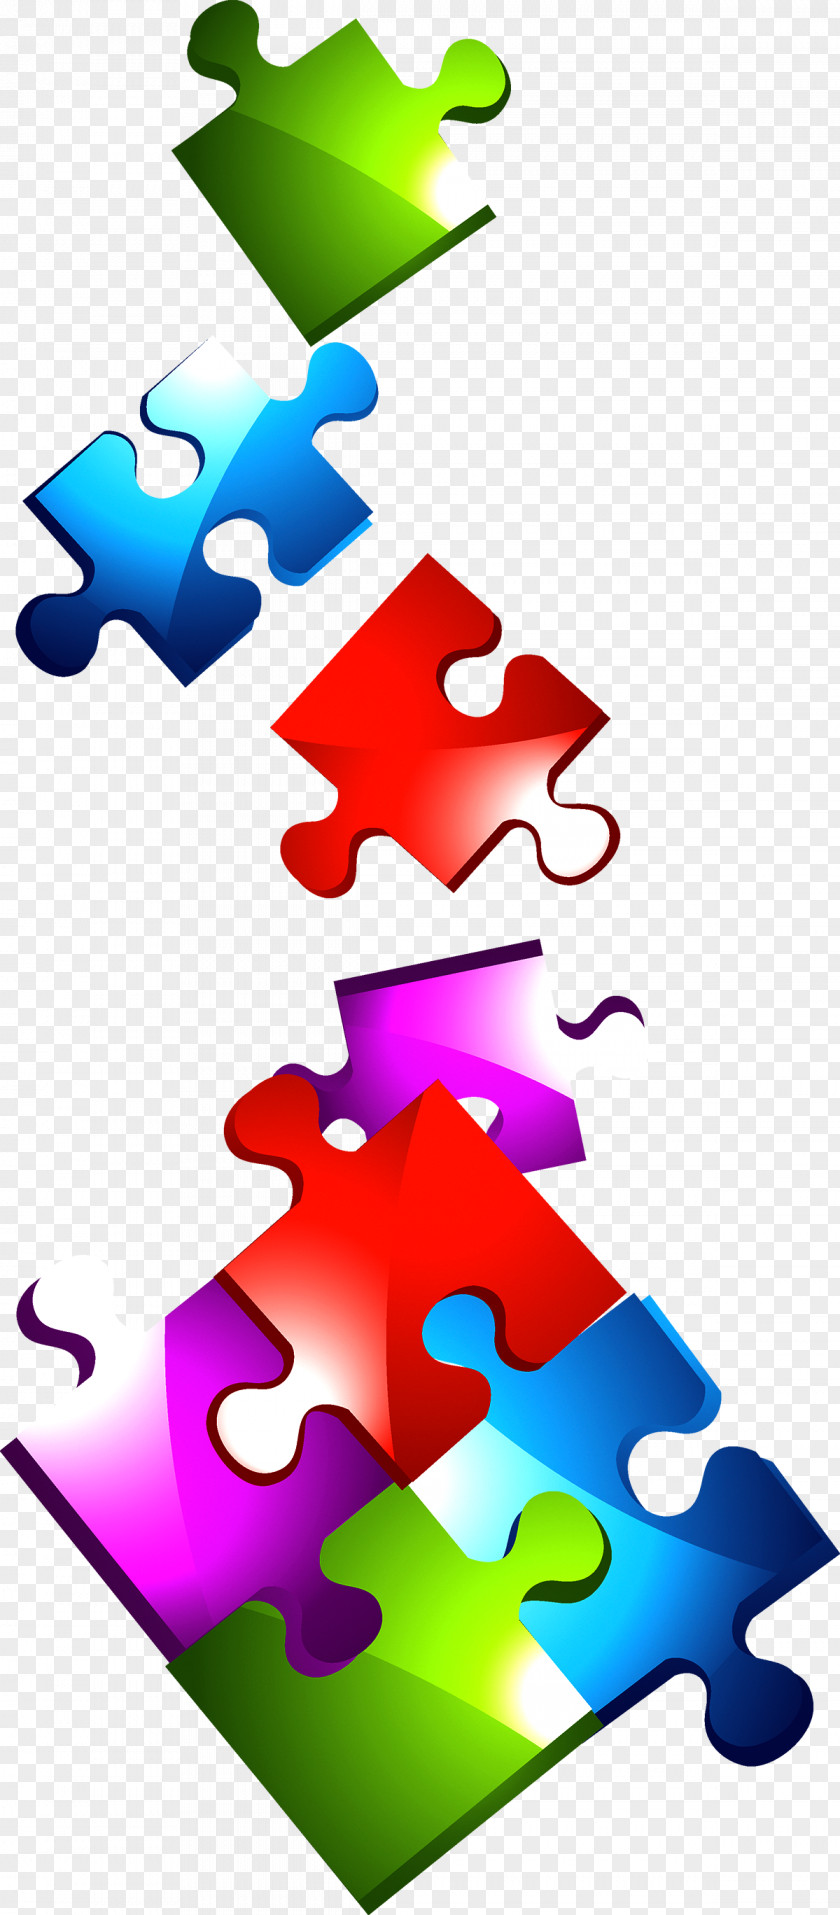 Colorful Puzzle Jigsaw Puzz 3D PNG